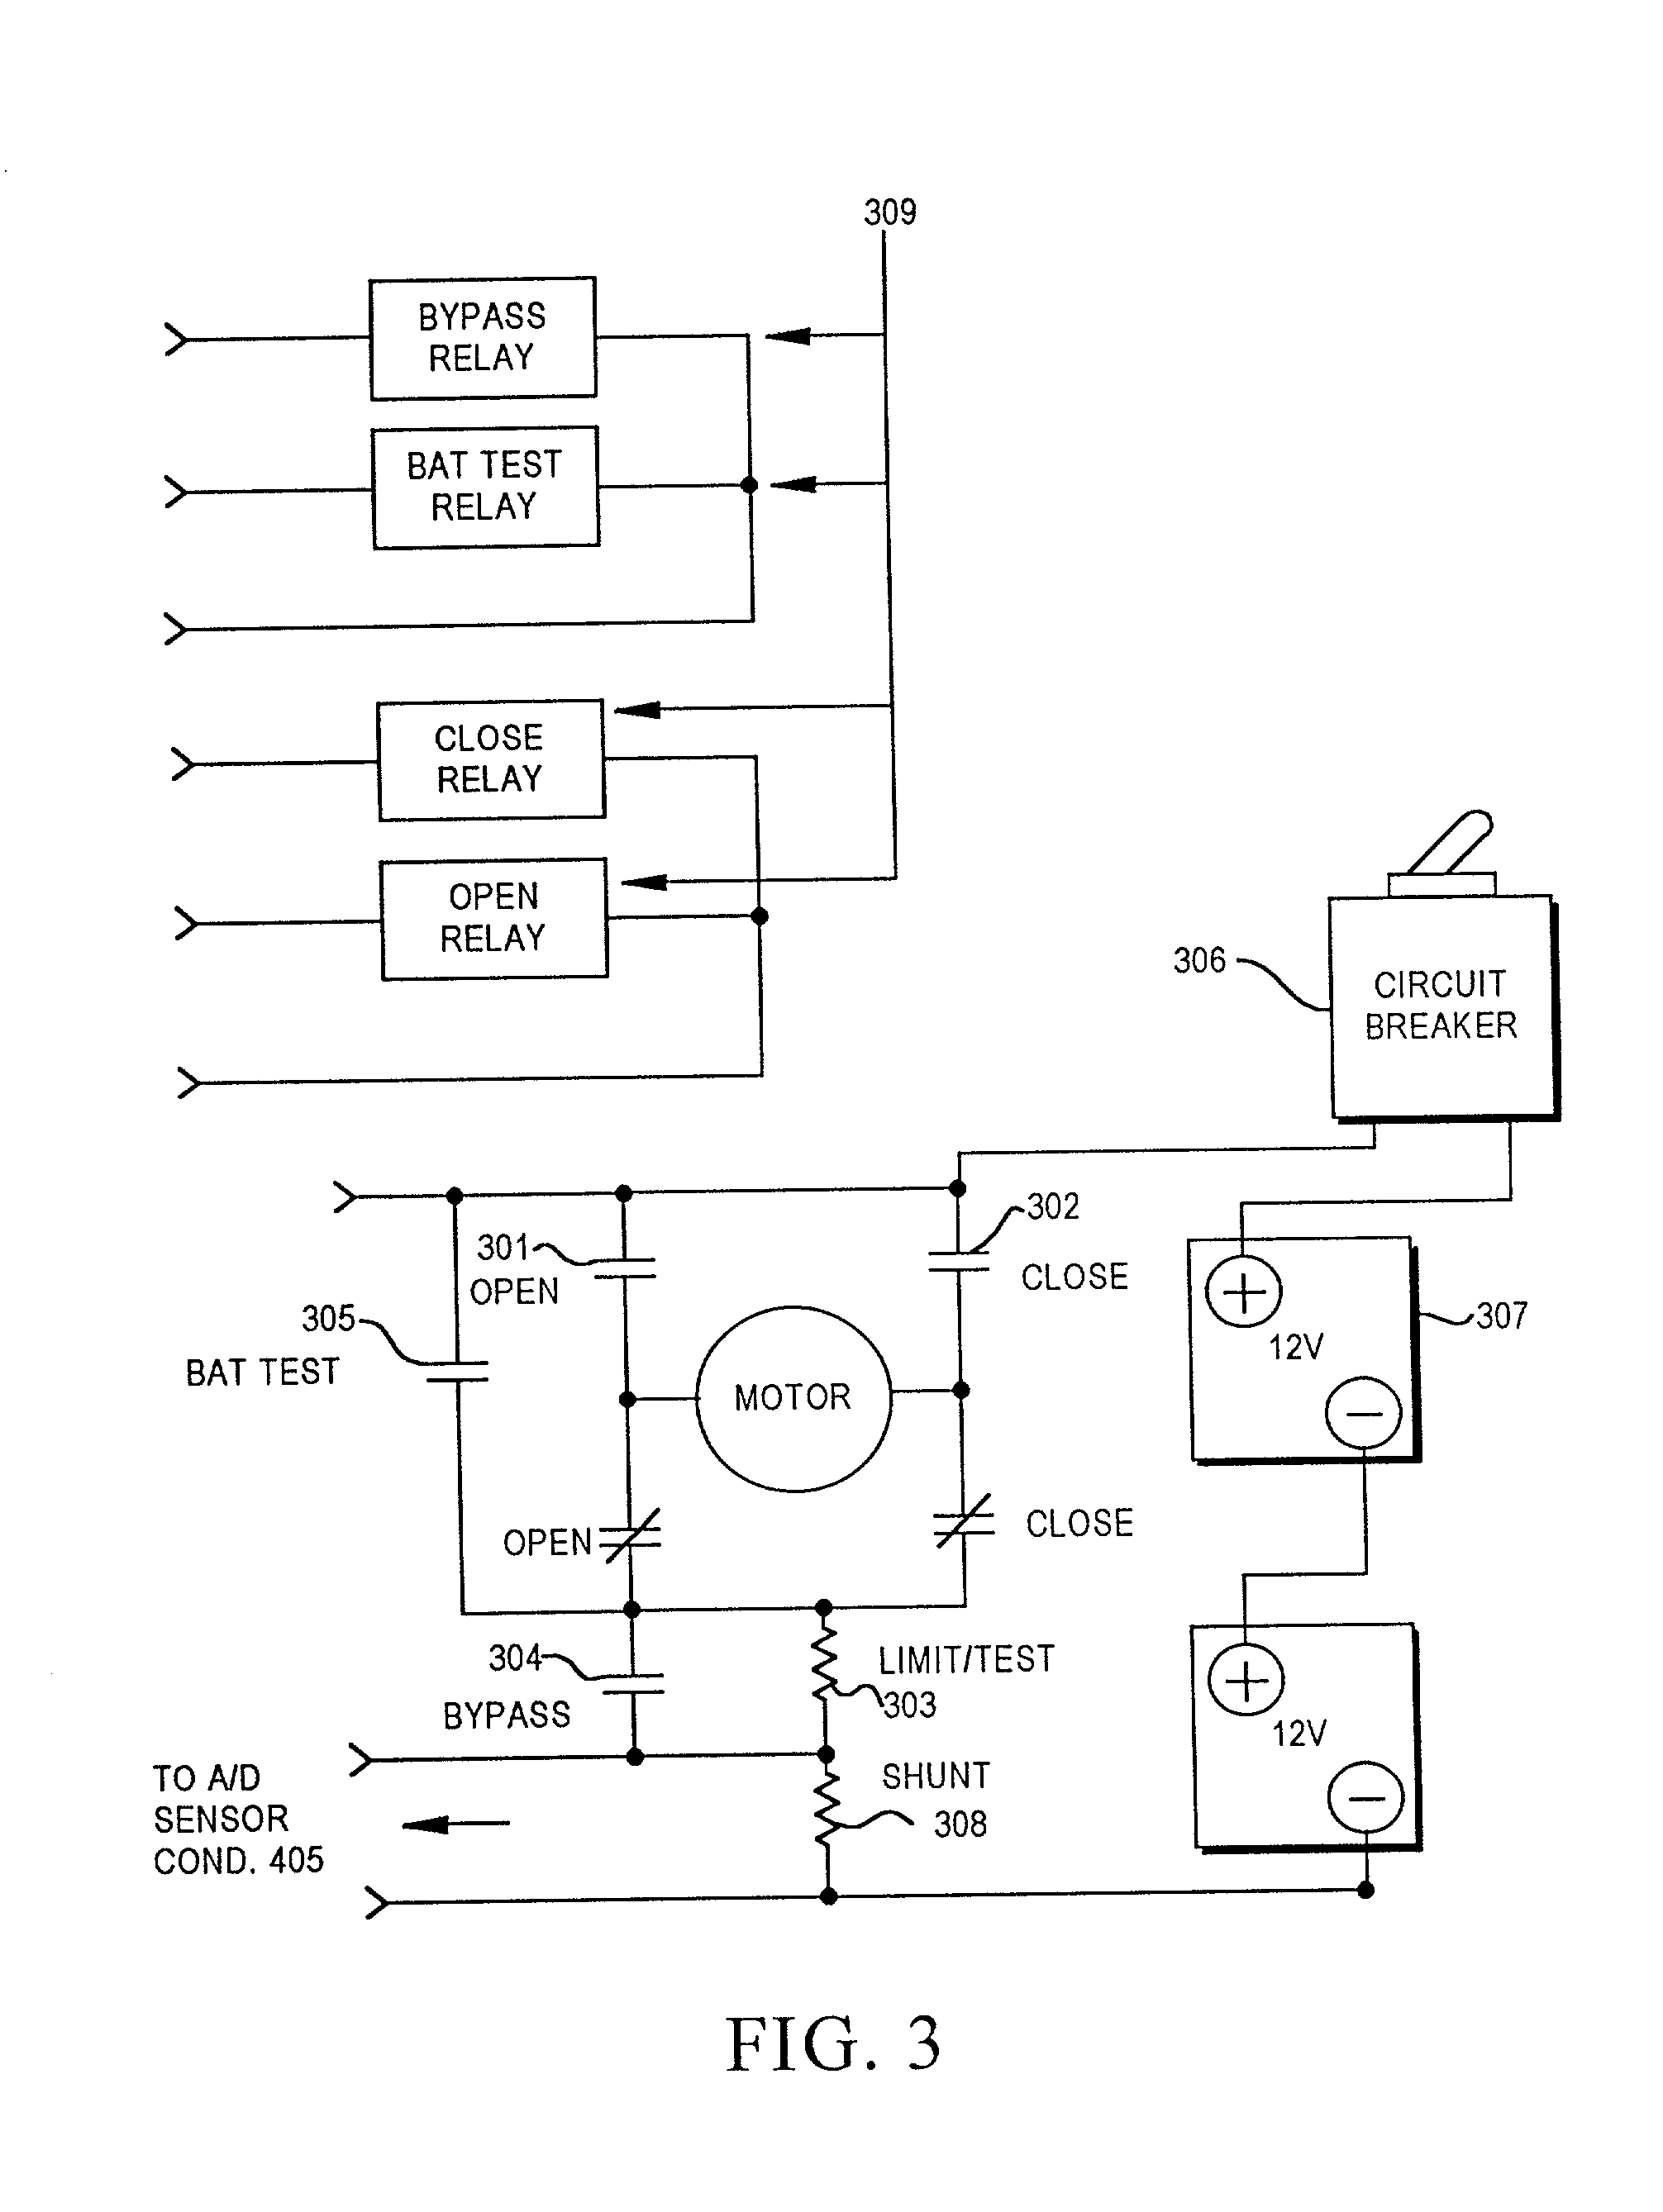 Motor operator for over-head air break electrical power distribution switches